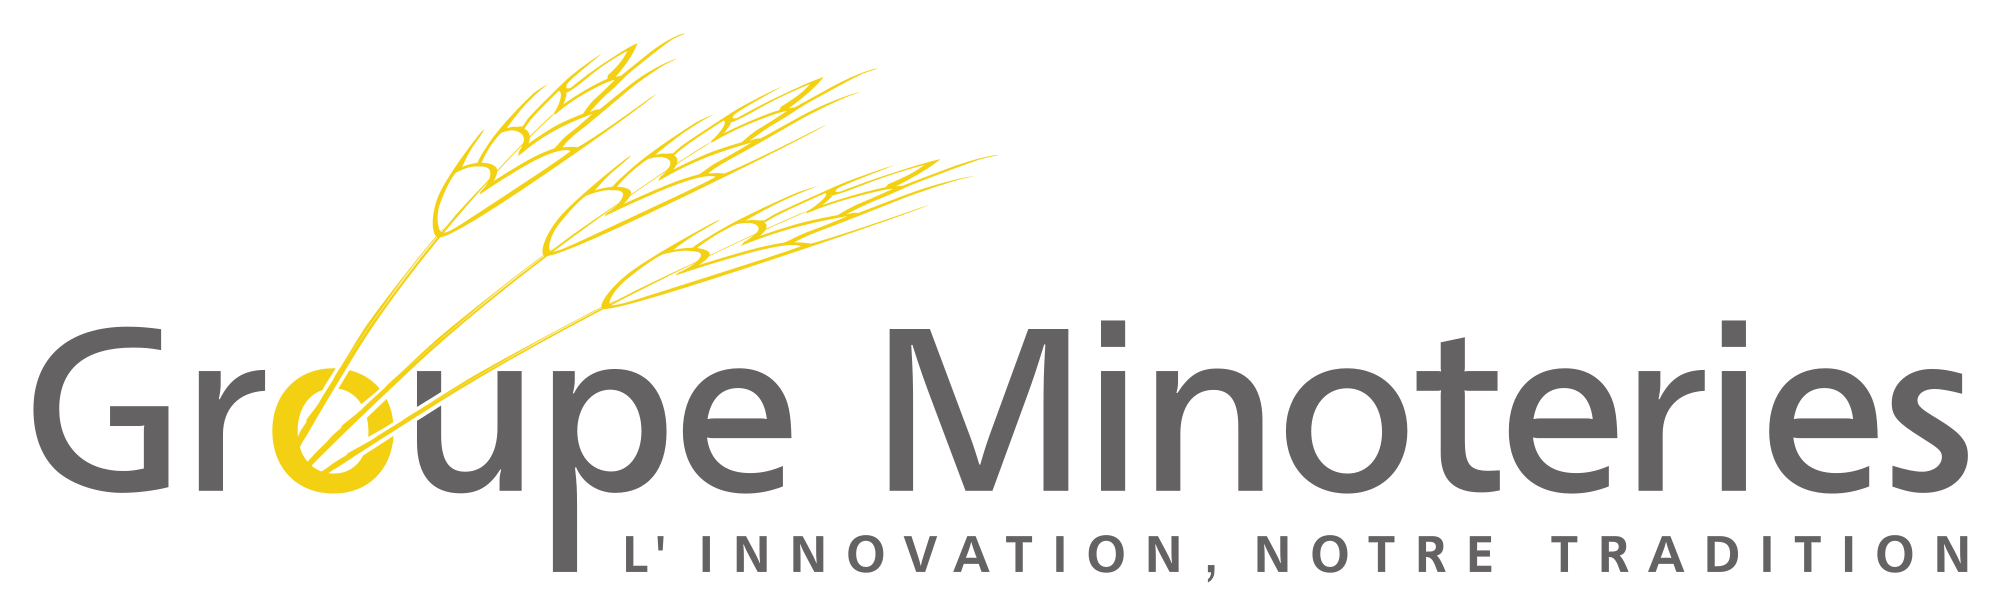 2000px-Logo_Groupe_Minoteries.svg.png